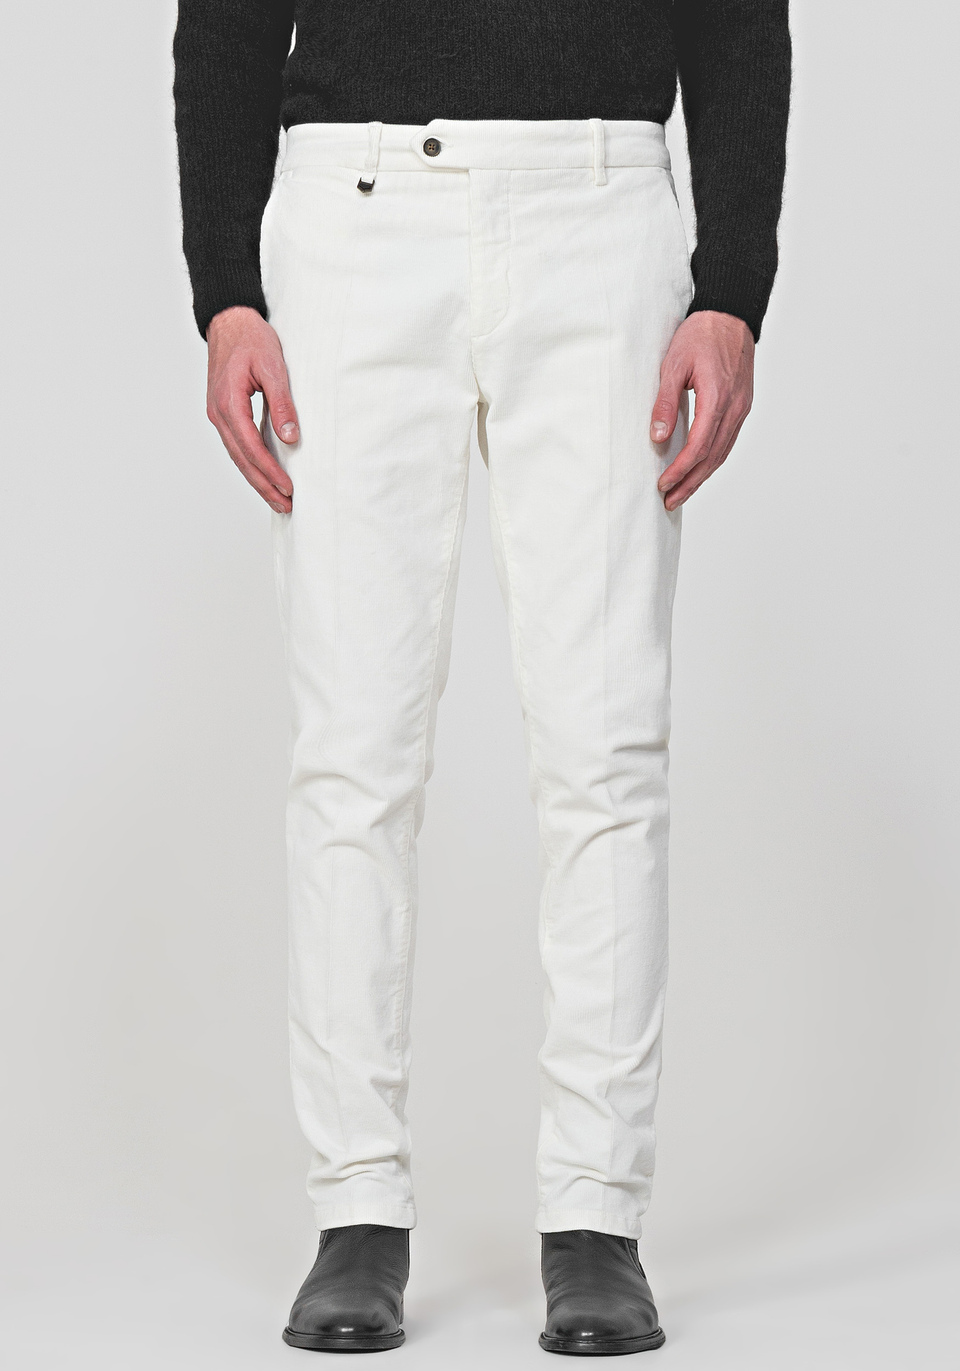 SKINNY-FIT “BRYAN” TROUSERS MADE FROM A SOFT OLD-LOOK CORDUROY - Antony Morato Online Shop